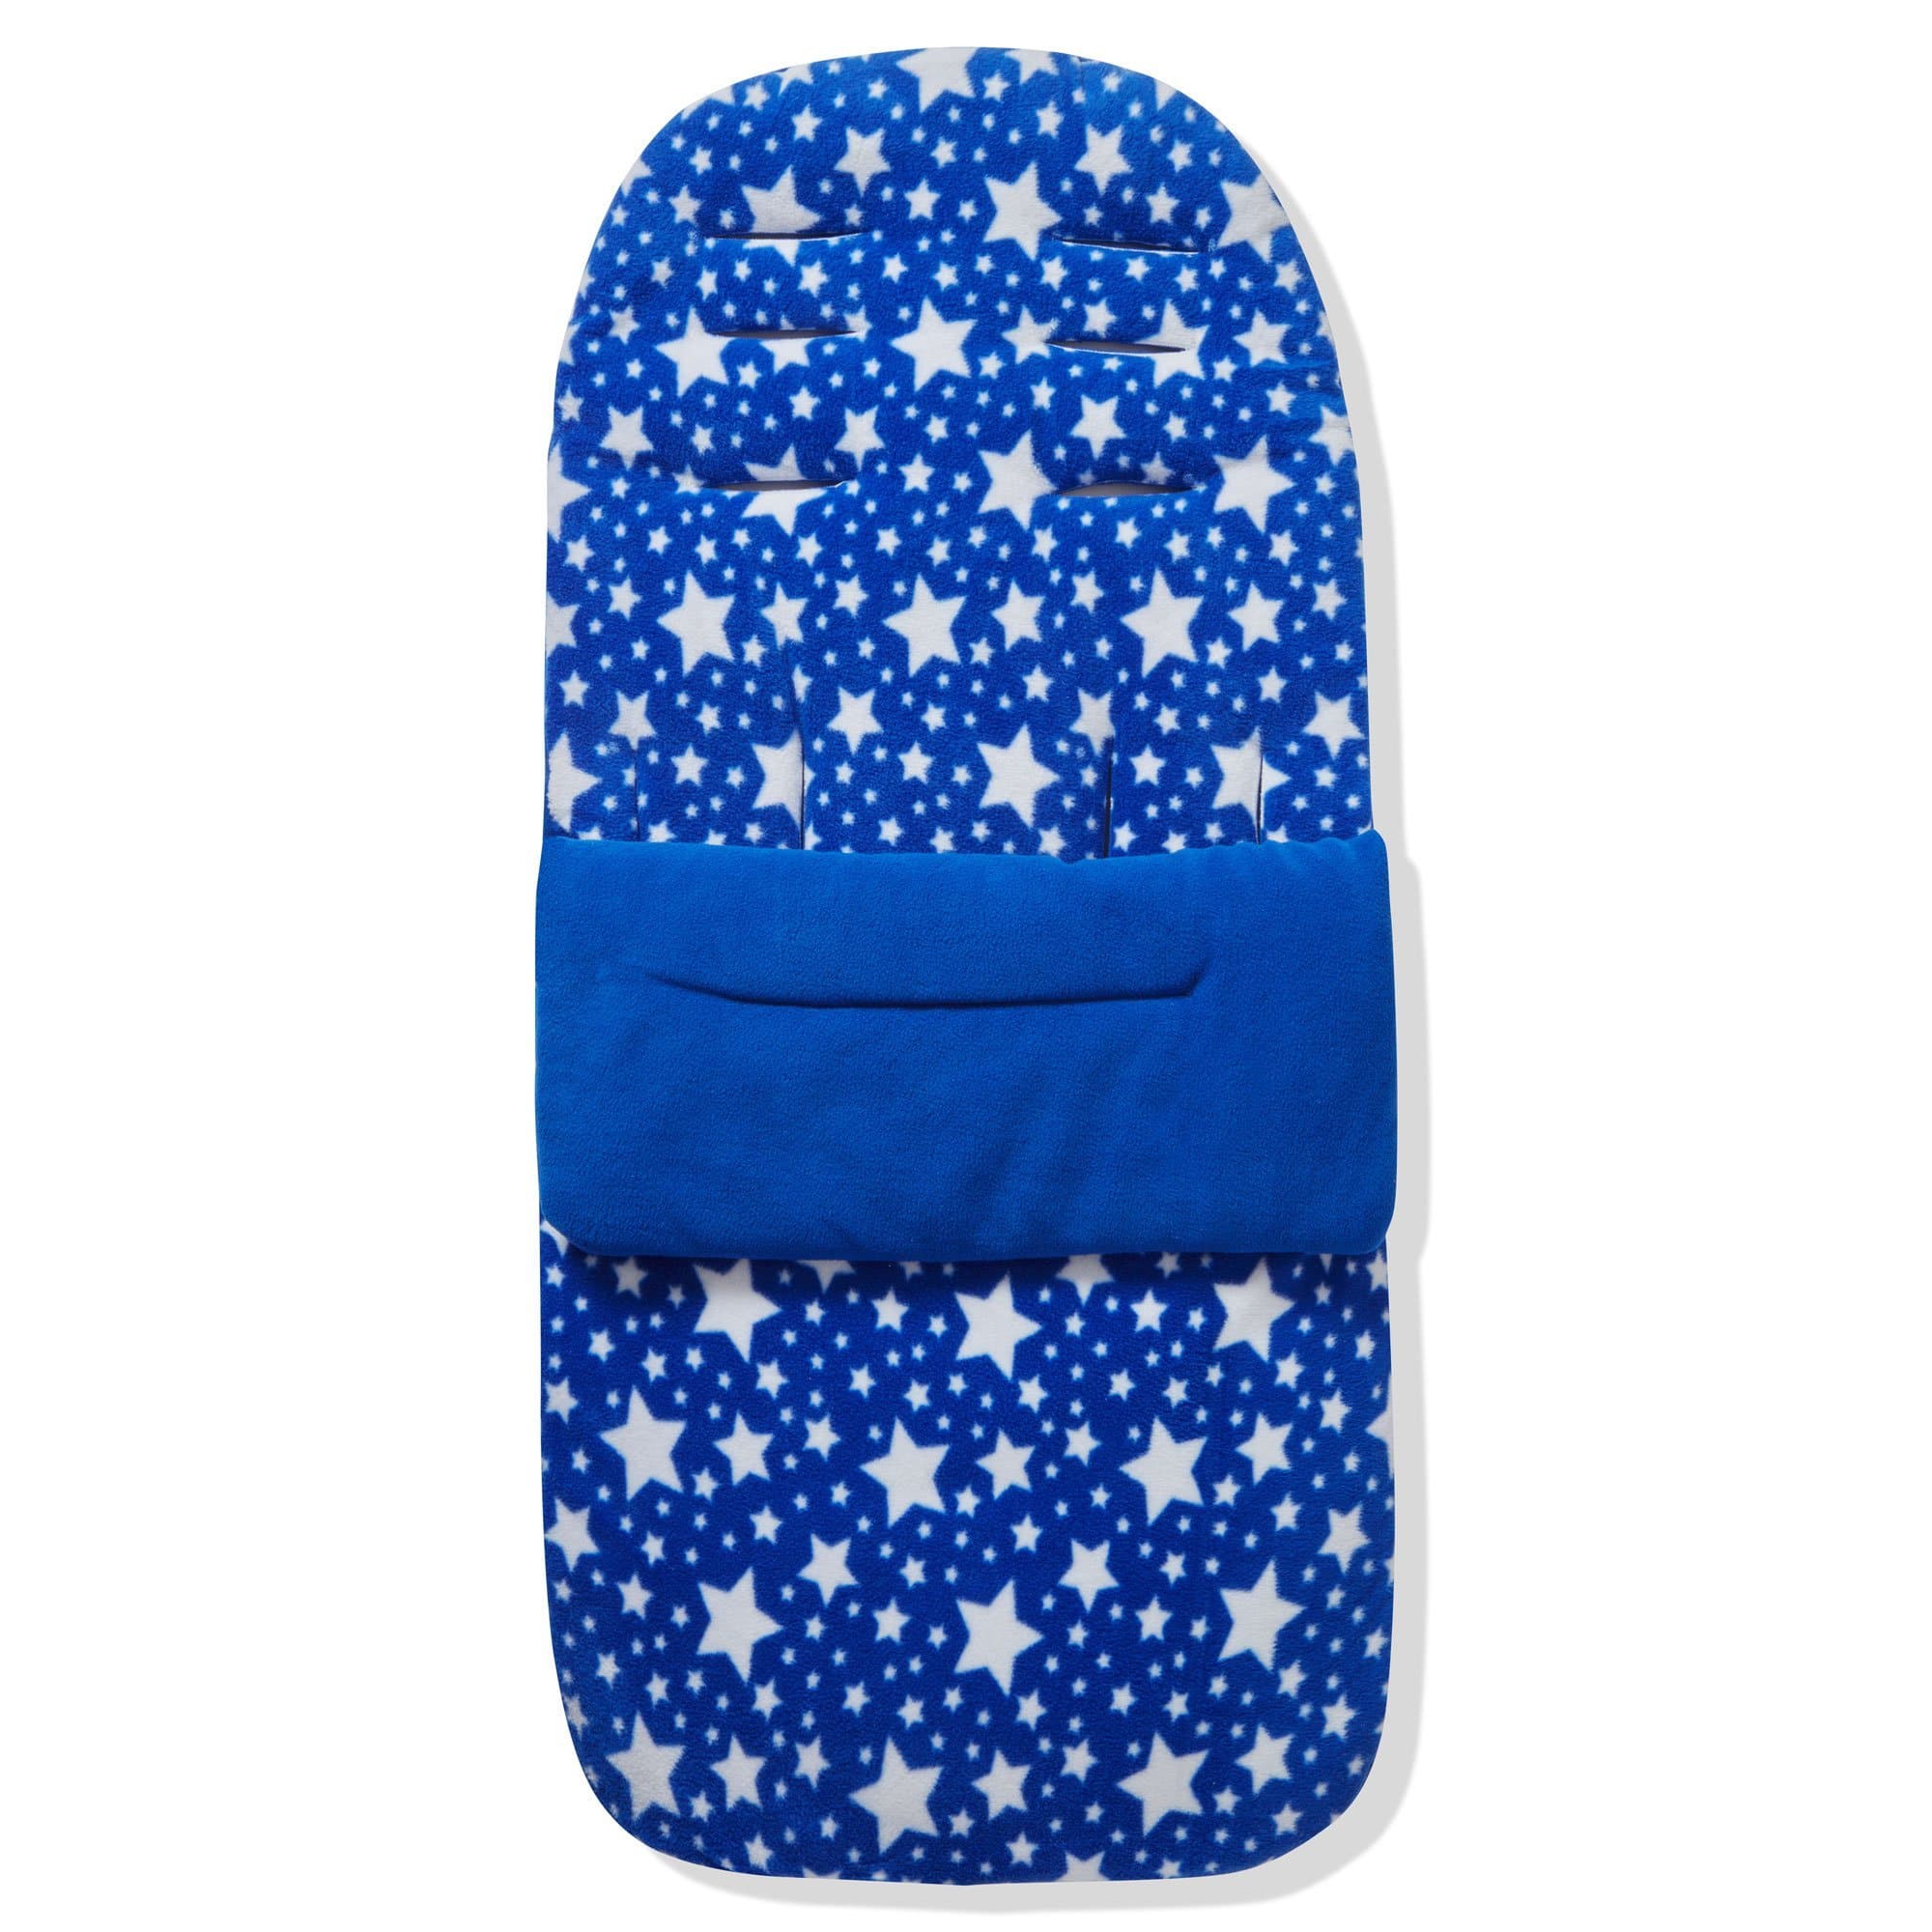 Fleece Footmuff / Cosy Toes Compatible with Koelstra - Blue Star / Fits All Models | For Your Little One